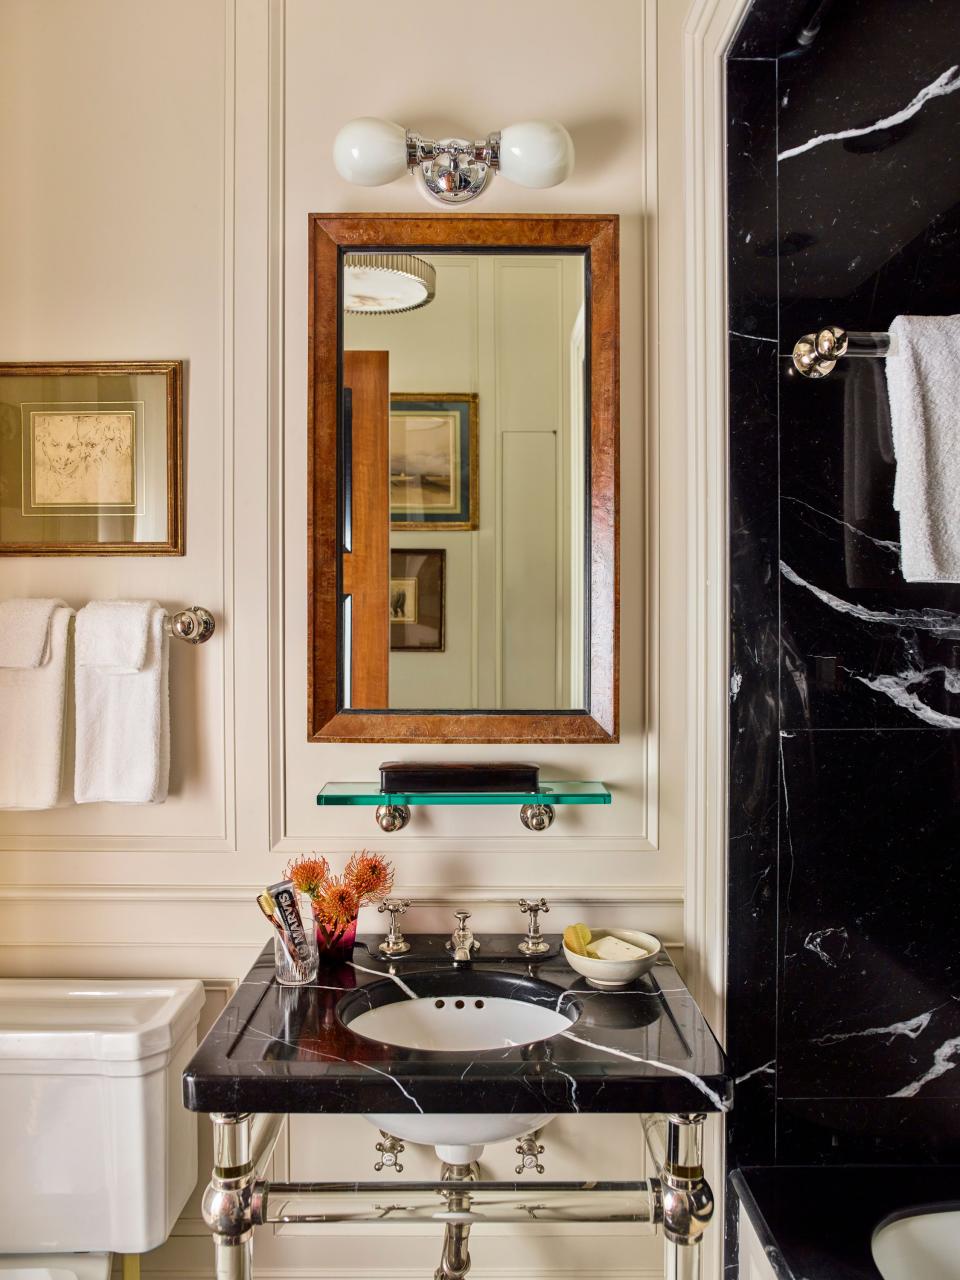 The bath echoes the apartment’s traditional aesthetic with a glass-leg sink stand from Urban Archaeology; faucets from Barber Wilsons; a custom mirror designed by Schafer; and a toilet, tub, and sconce by Waterworks. The tub enclosure and sink countertop add contrast to wood paneling in Benjamin Moore’s Seapearl thanks to Nero Marquina marble.